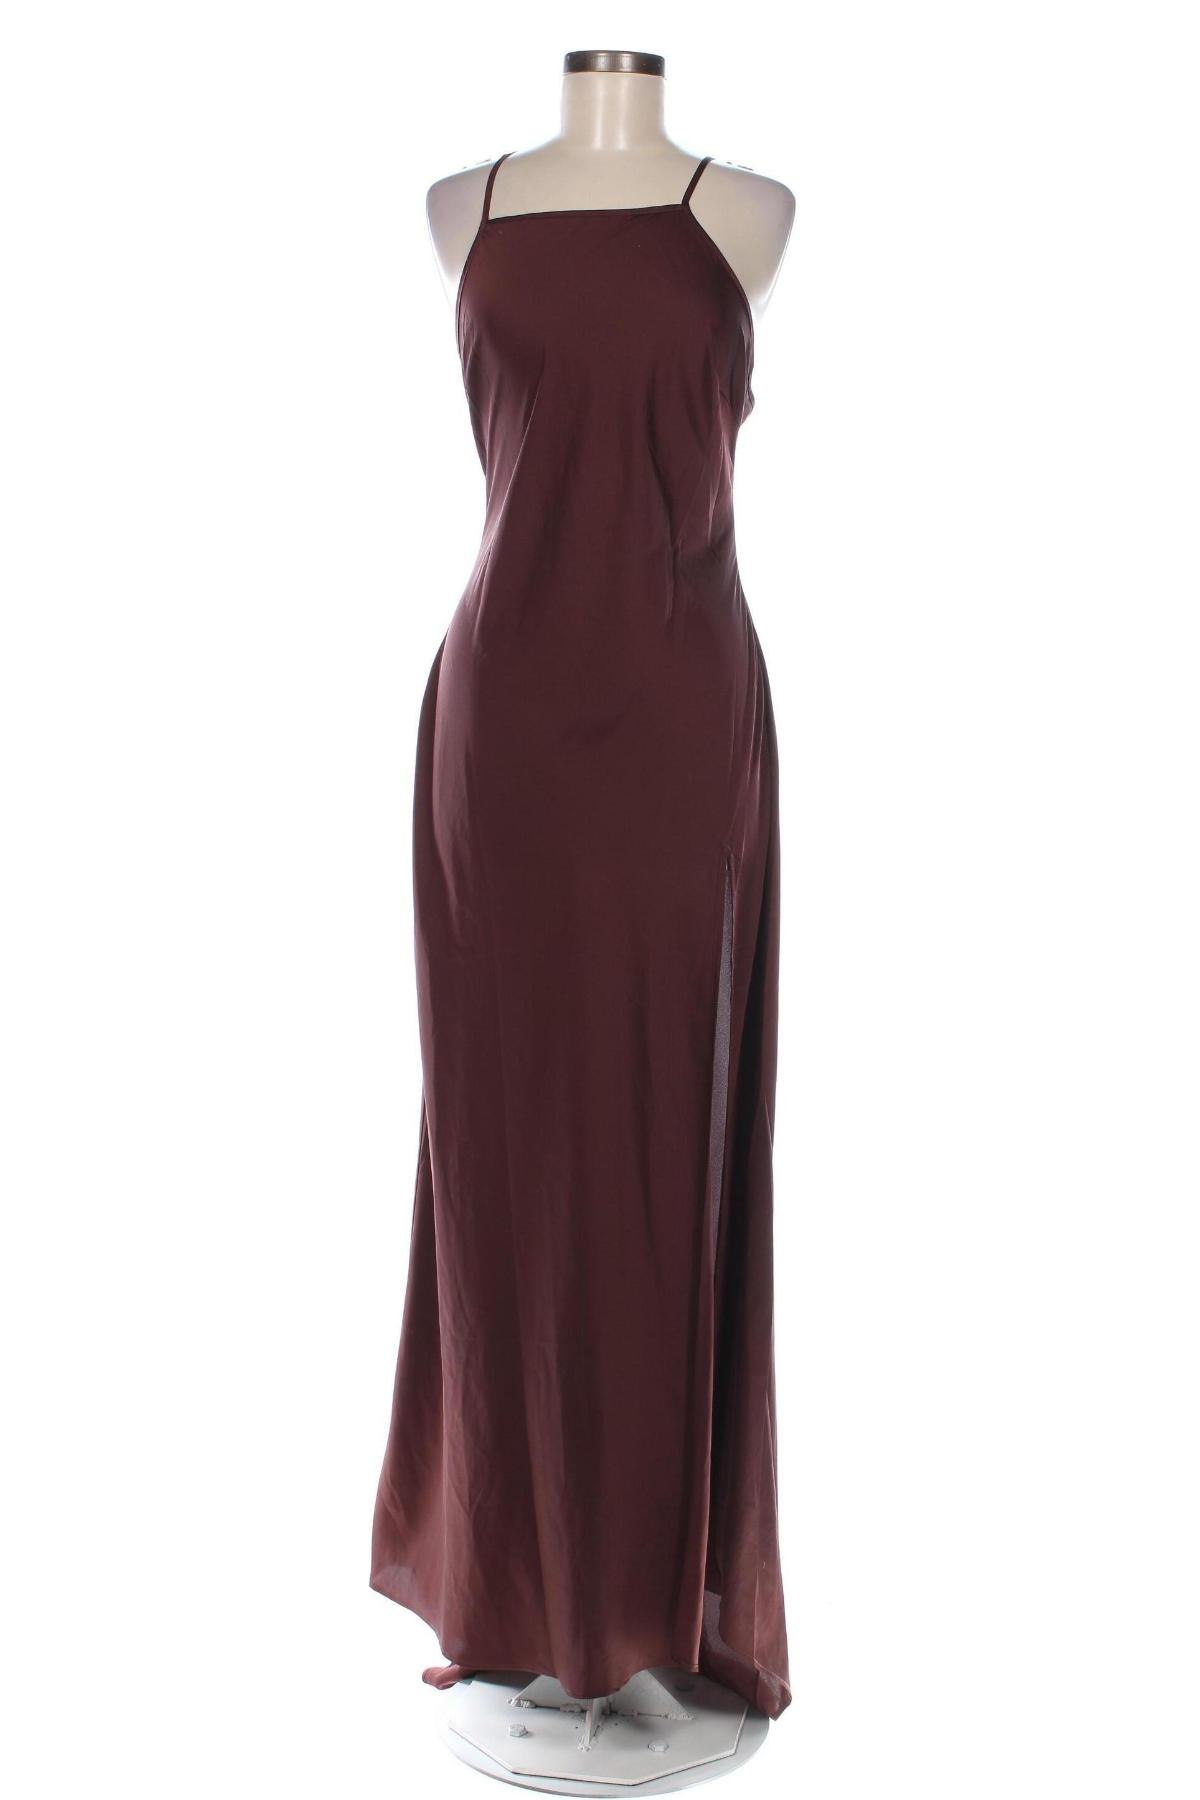 Kleid Guido Maria Kretschmer for About You, Größe L, Farbe Rot, Preis 43,30 €